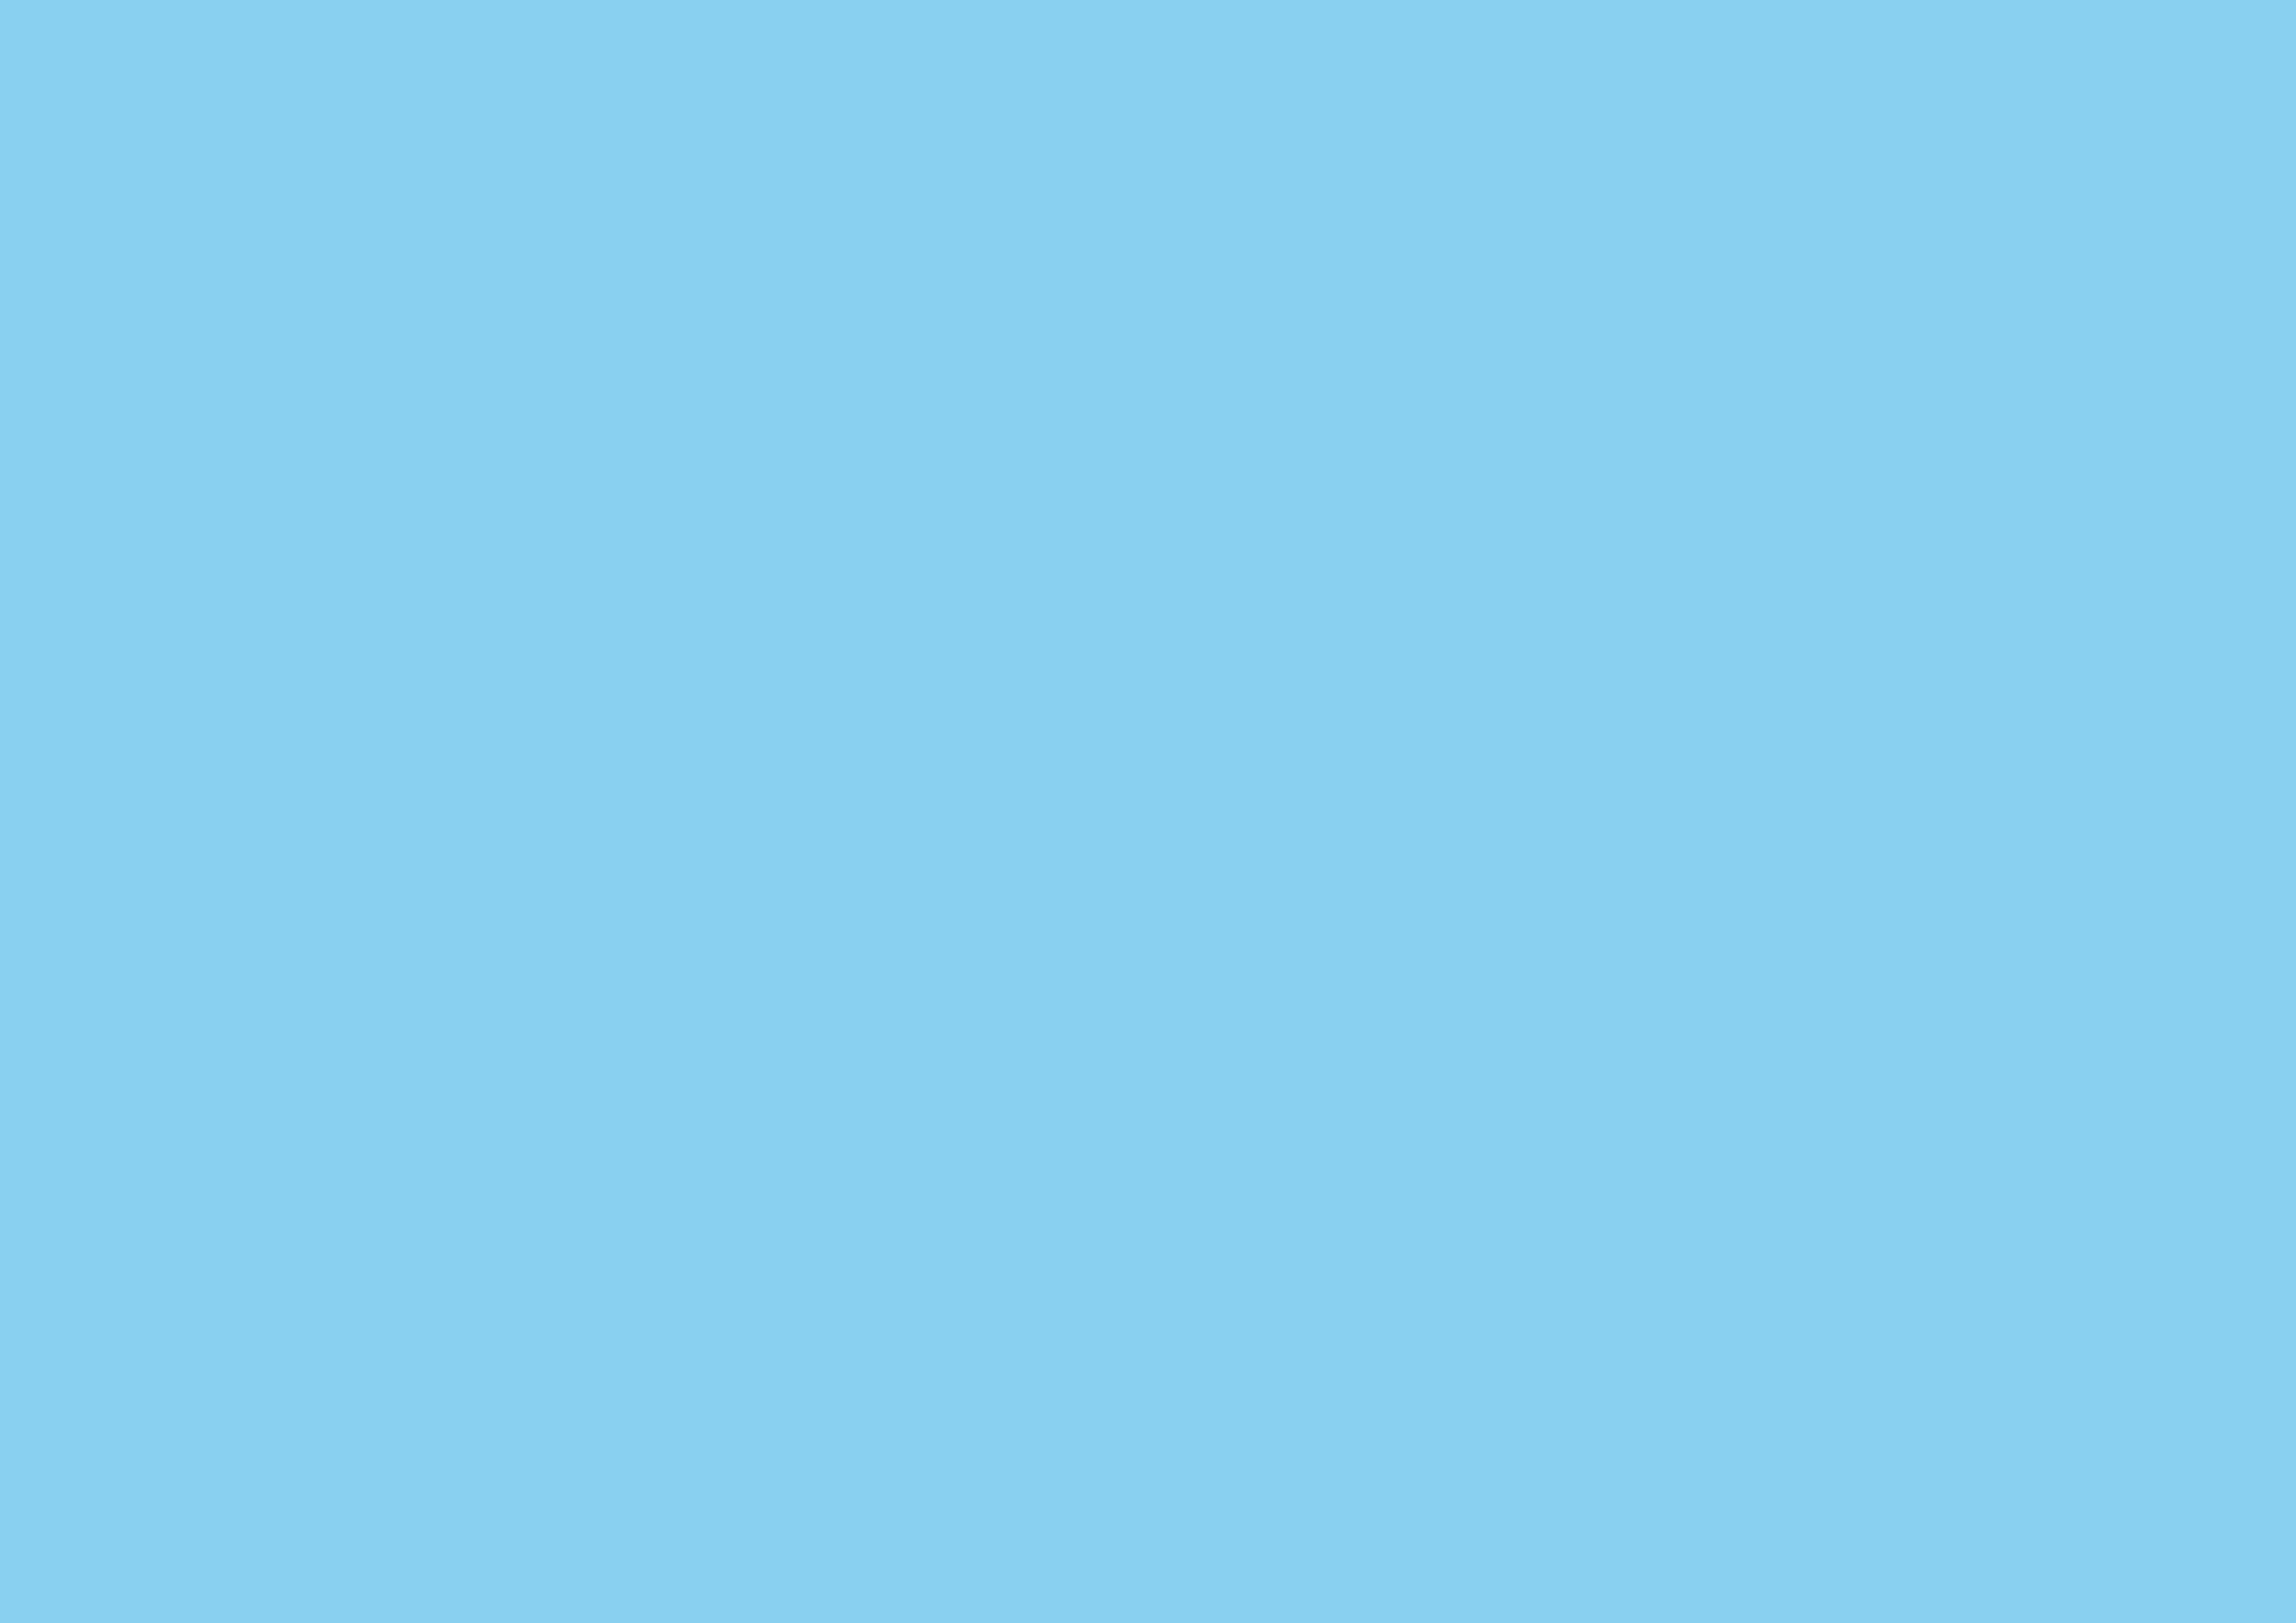 3508x2480 Baby Blue Solid Color Background